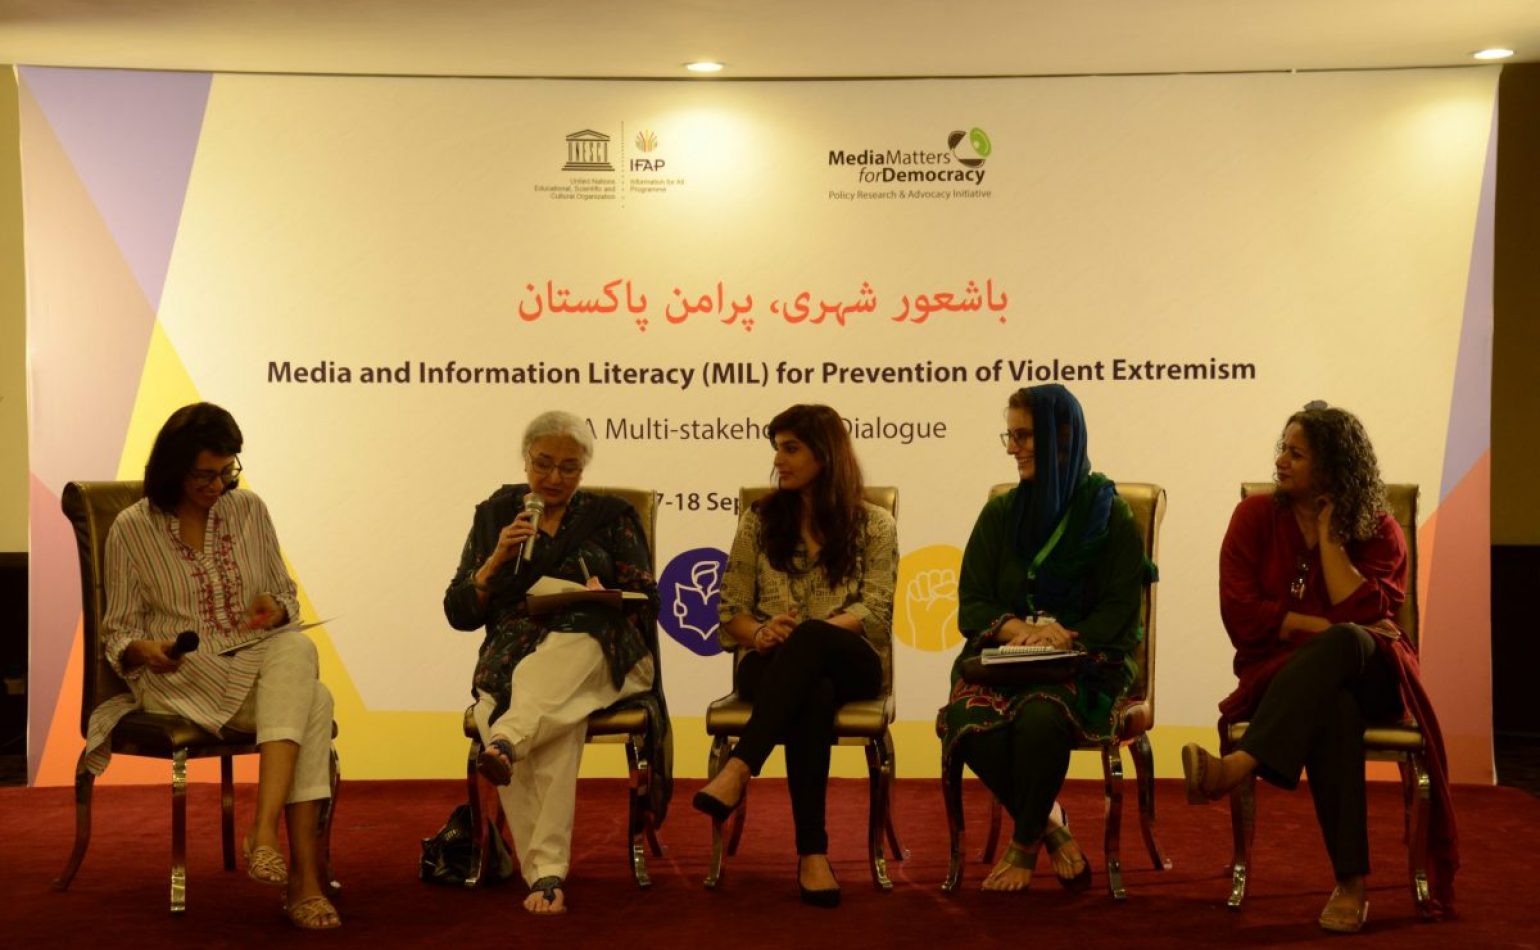 UNESCO, Media Matters for Democracy (MMFD) and Information for All Programme (IFAP) hosts a 2-day national conference on Media and Information Literacy for Prevention of Violent Extremism